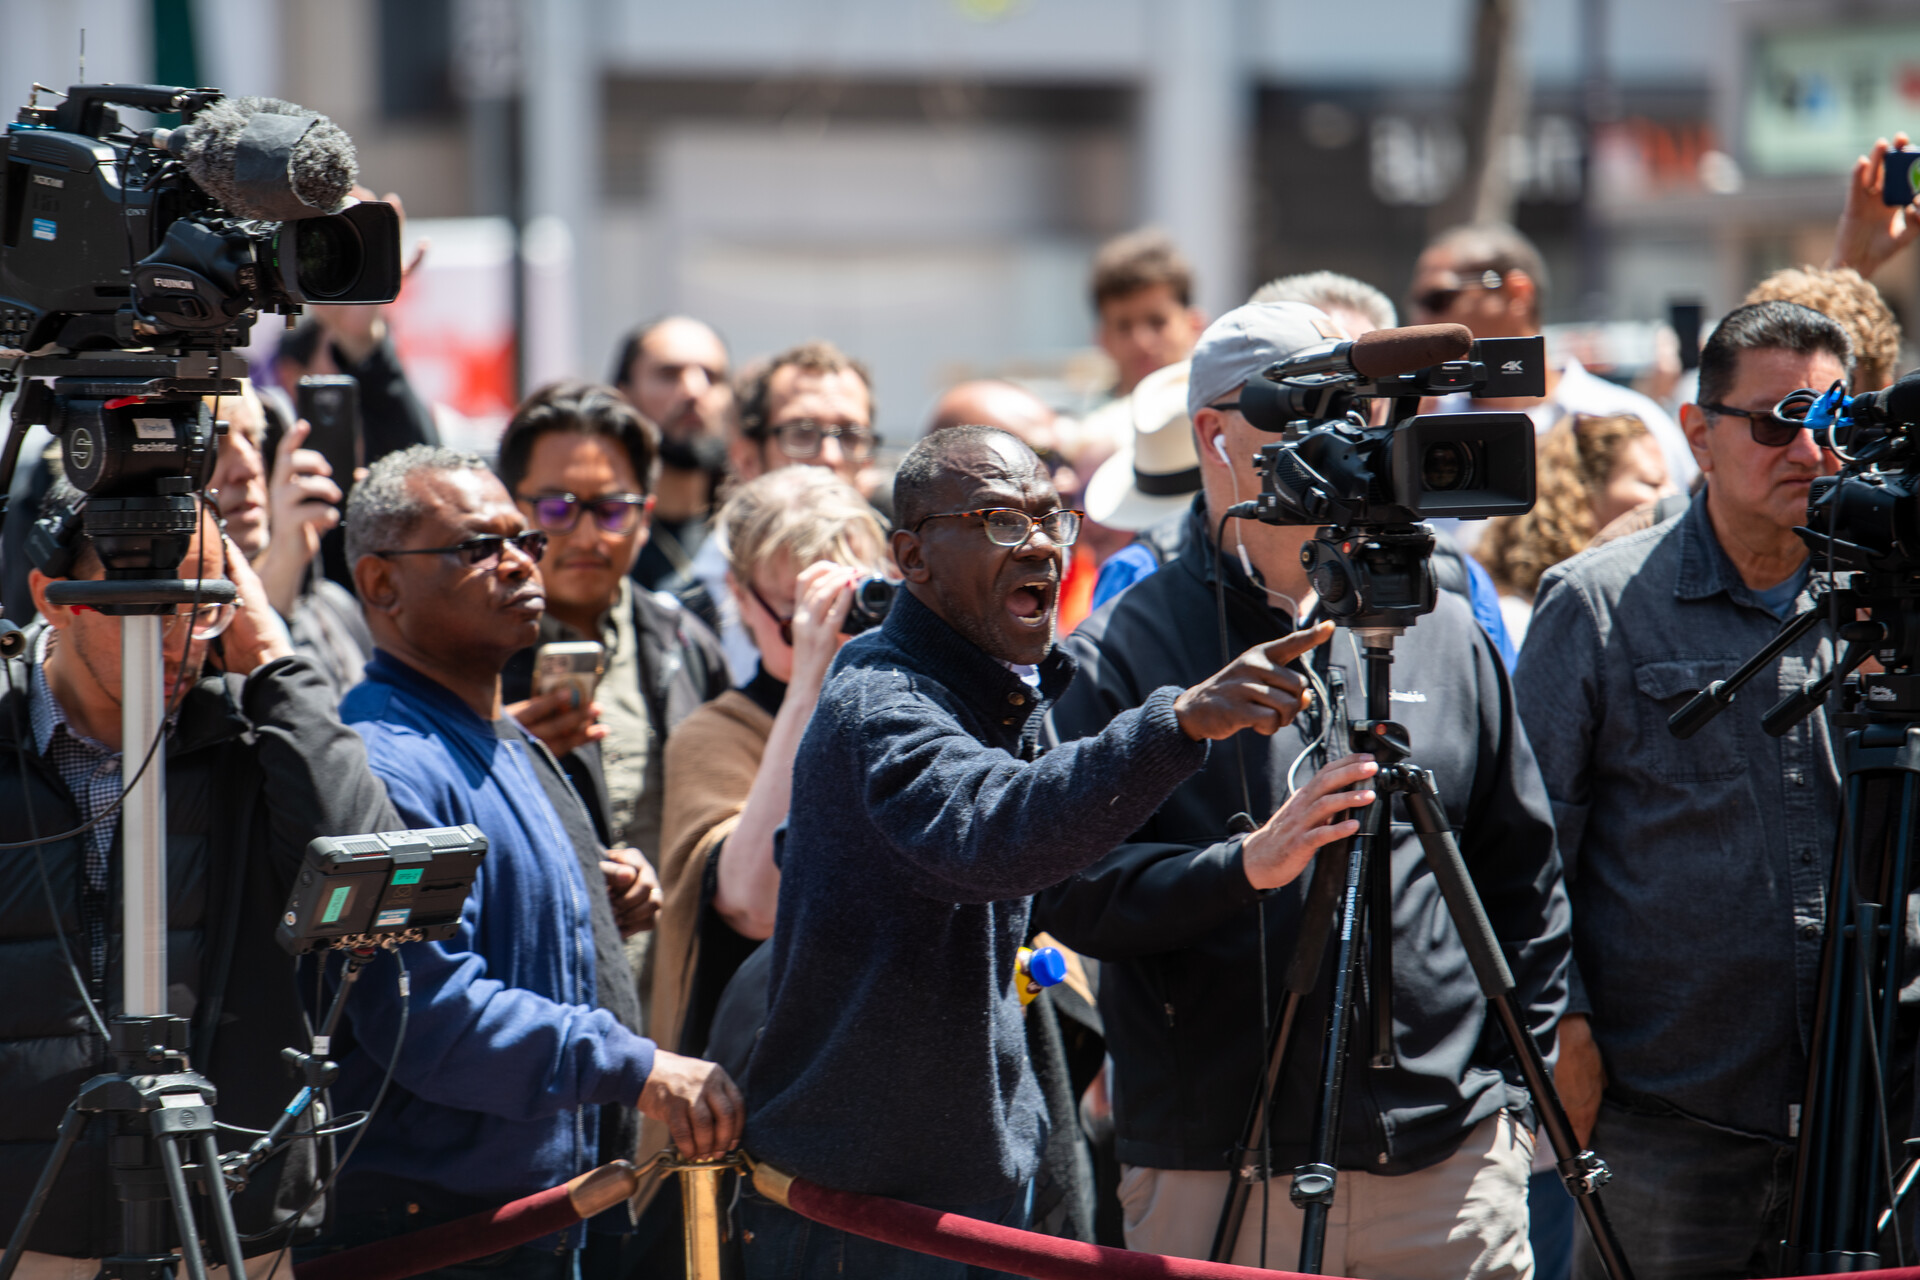 A middle-aged Black man stands behind a camera, in a crowd, shouting.